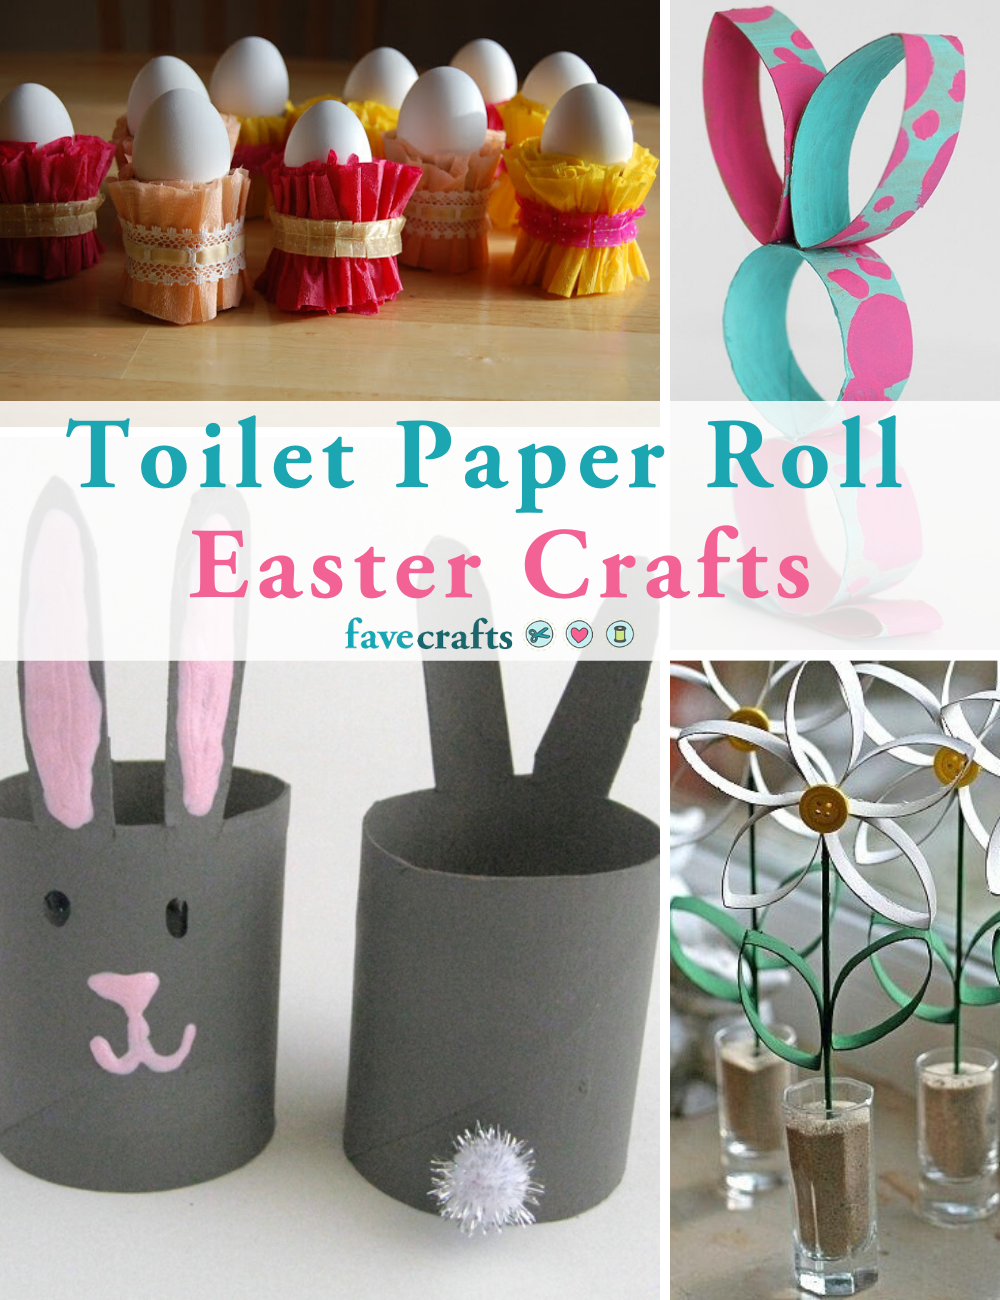 Quick Toilet Paper Roll Bunnies - East Crafts for Kids - Red Ted Art - Kids  Crafts